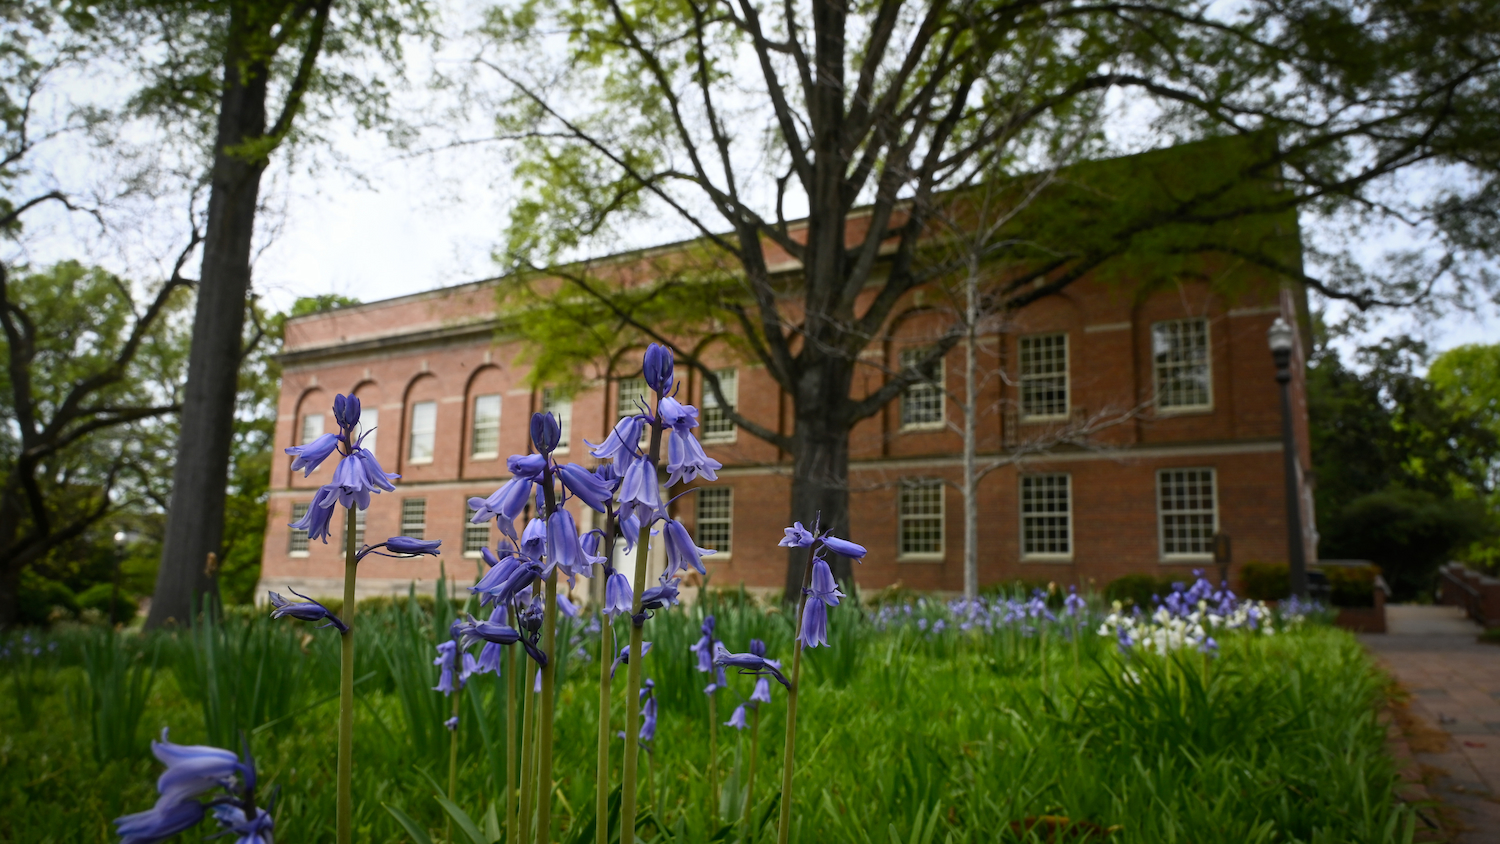 Spring flowers start to bloom in the Mary Yarbrough court near Peele Hall.